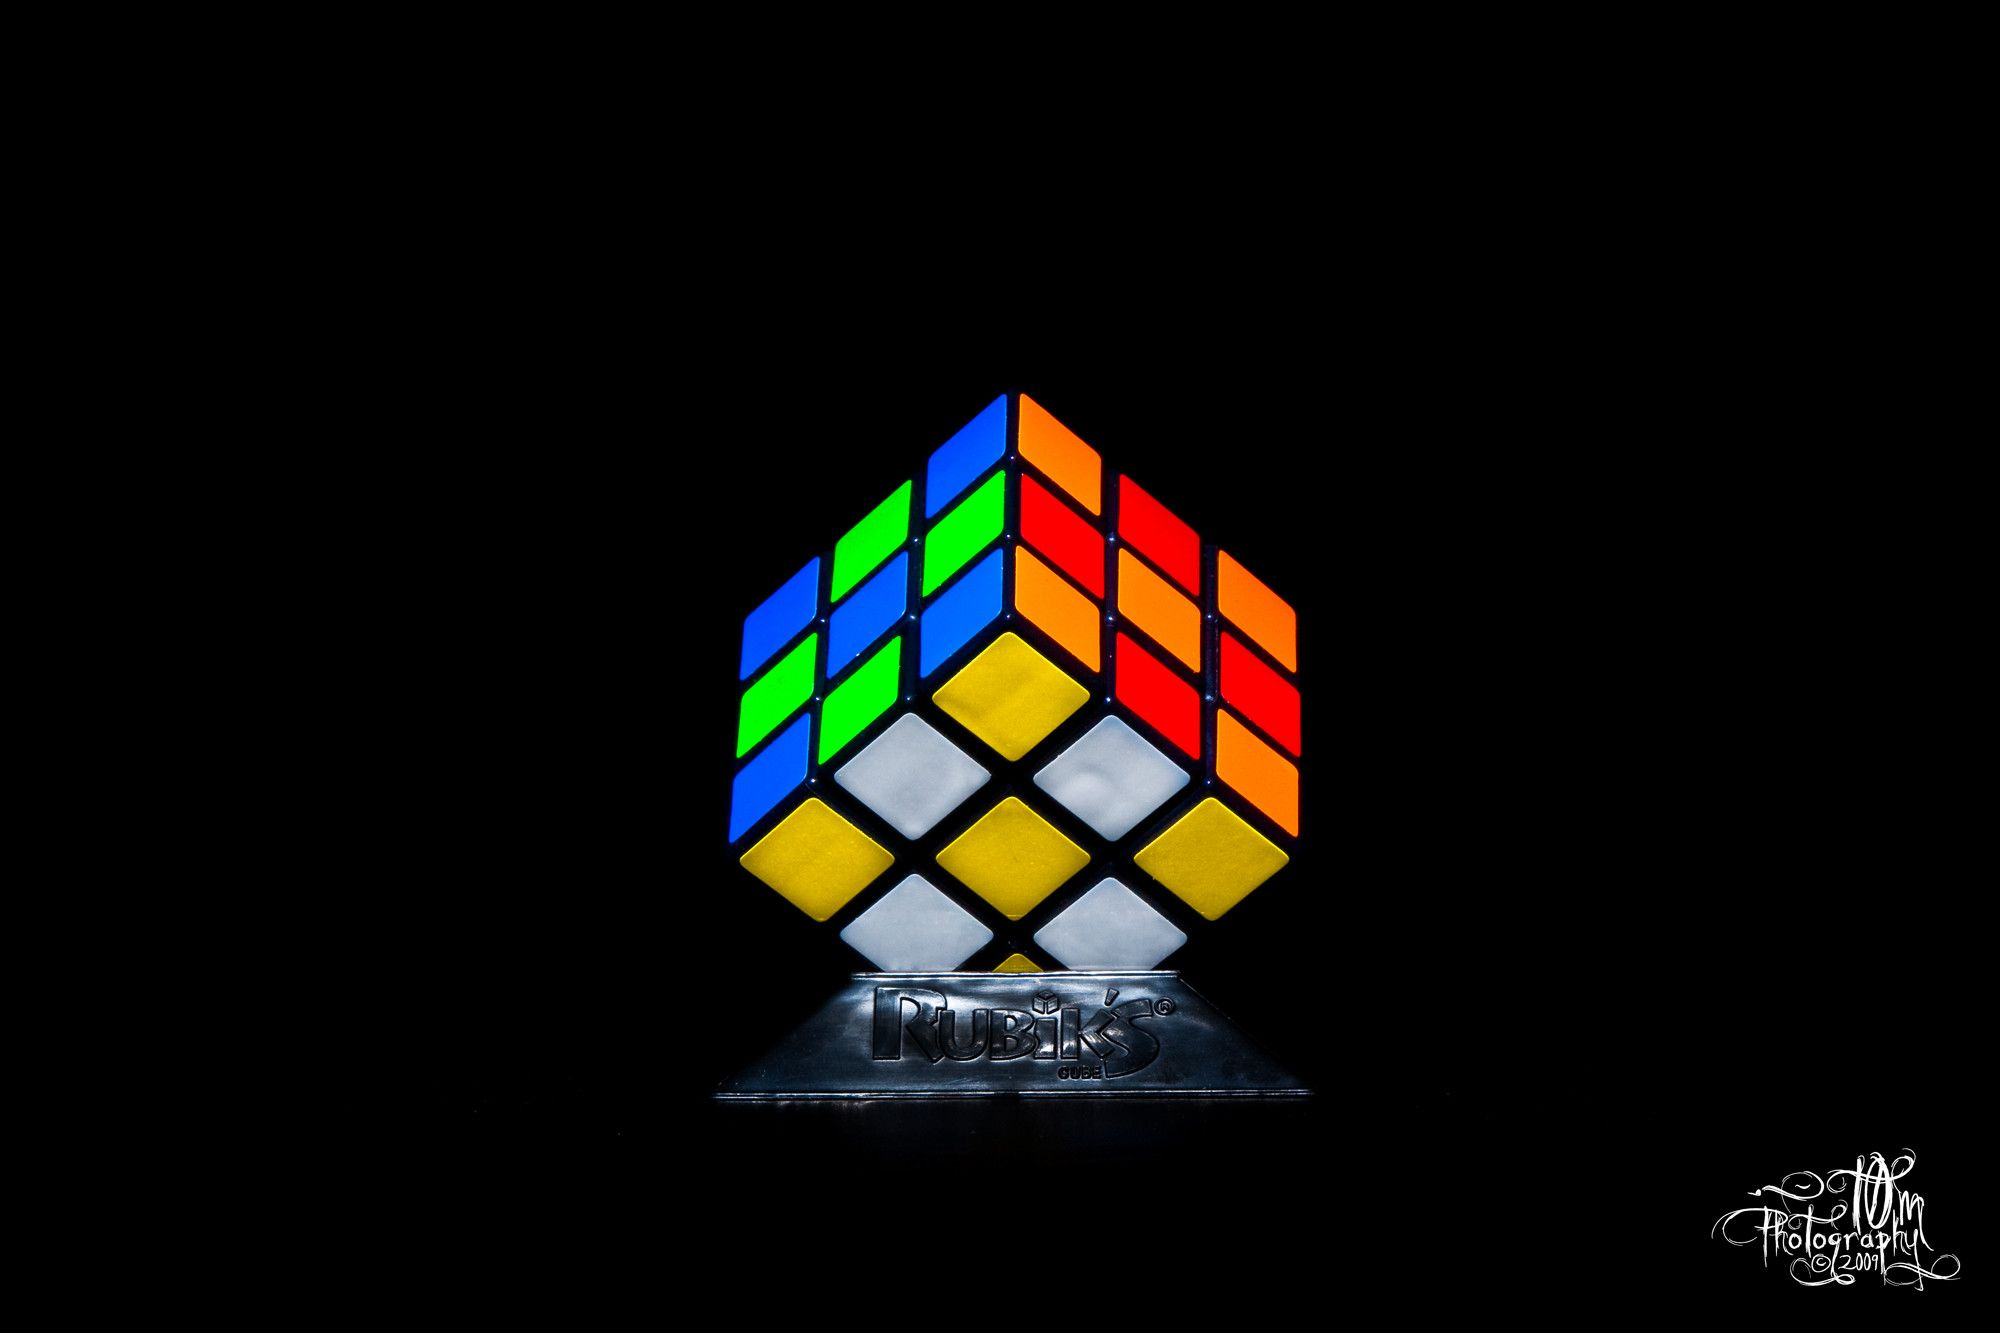 2000x1333 Rubik's Cube Wallpapers Top Free Rubik's Cube Backgrounds